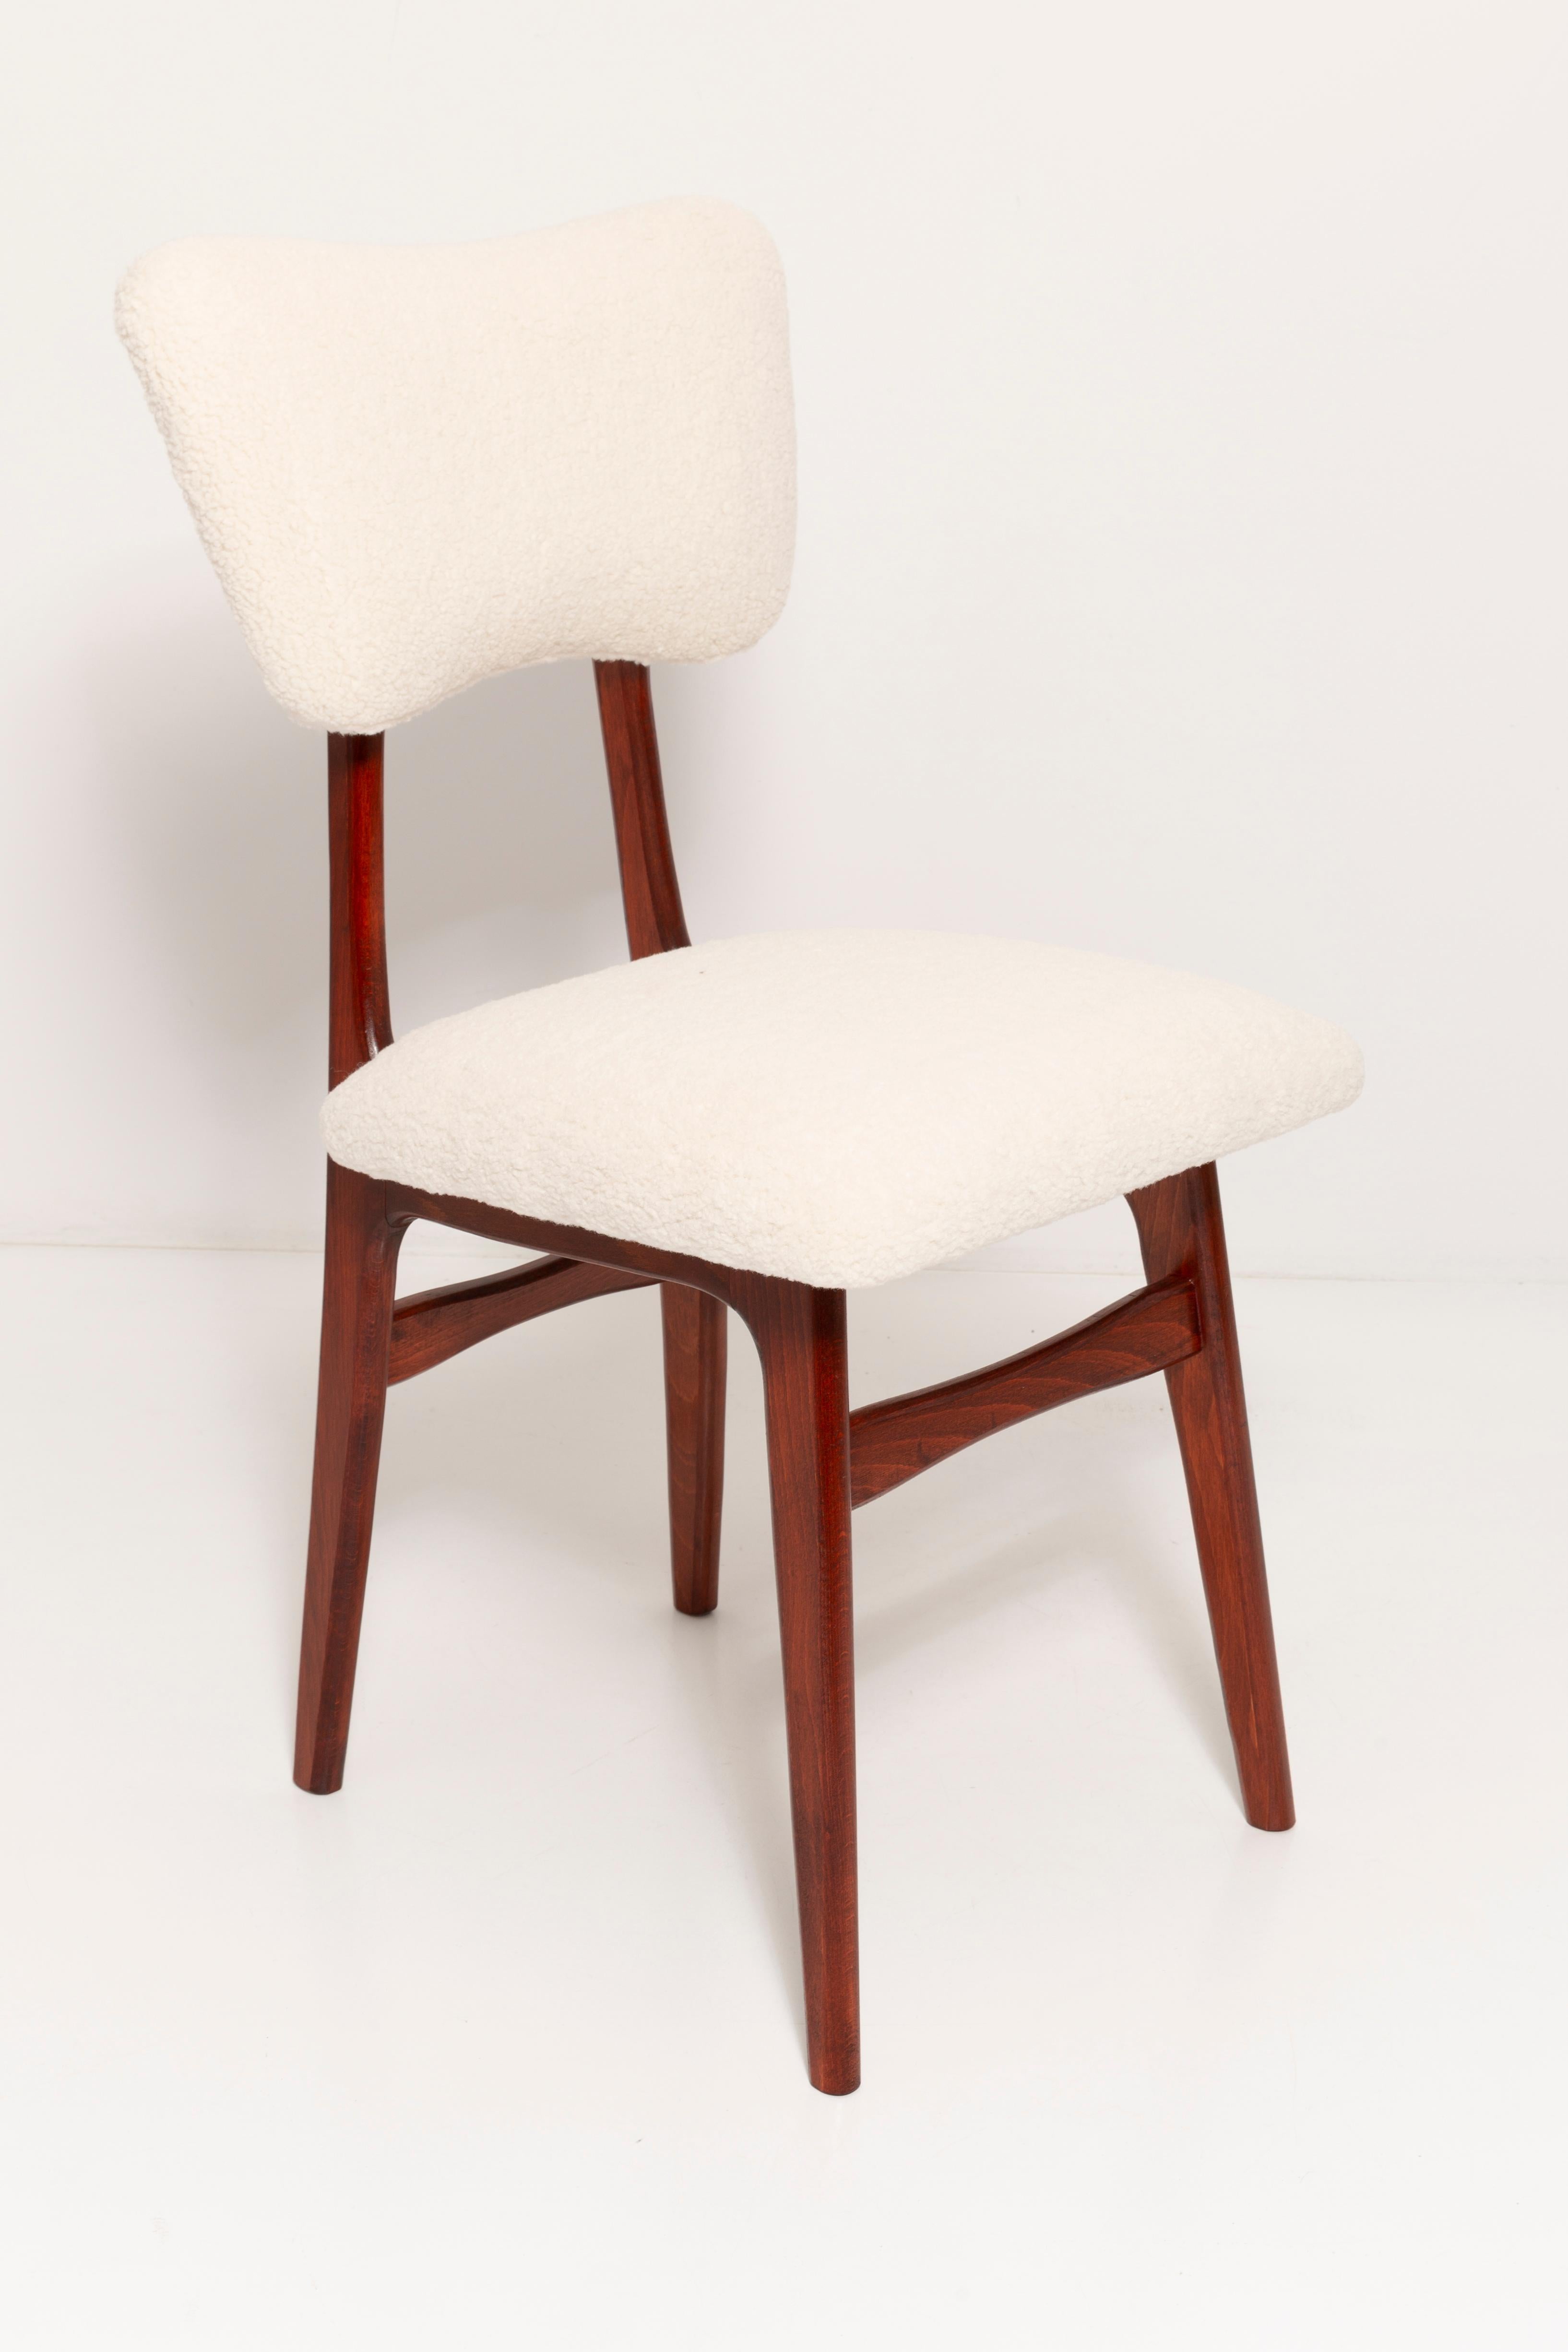 Chair designed by Prof. Rajmund Halas. Made of beechwood in cherry color. Chair is after a complete upholstery renovation; the woodwork has been refreshed. Seat and back is dressed in crème, durable and pleasant to the touch bouclé fabric (color